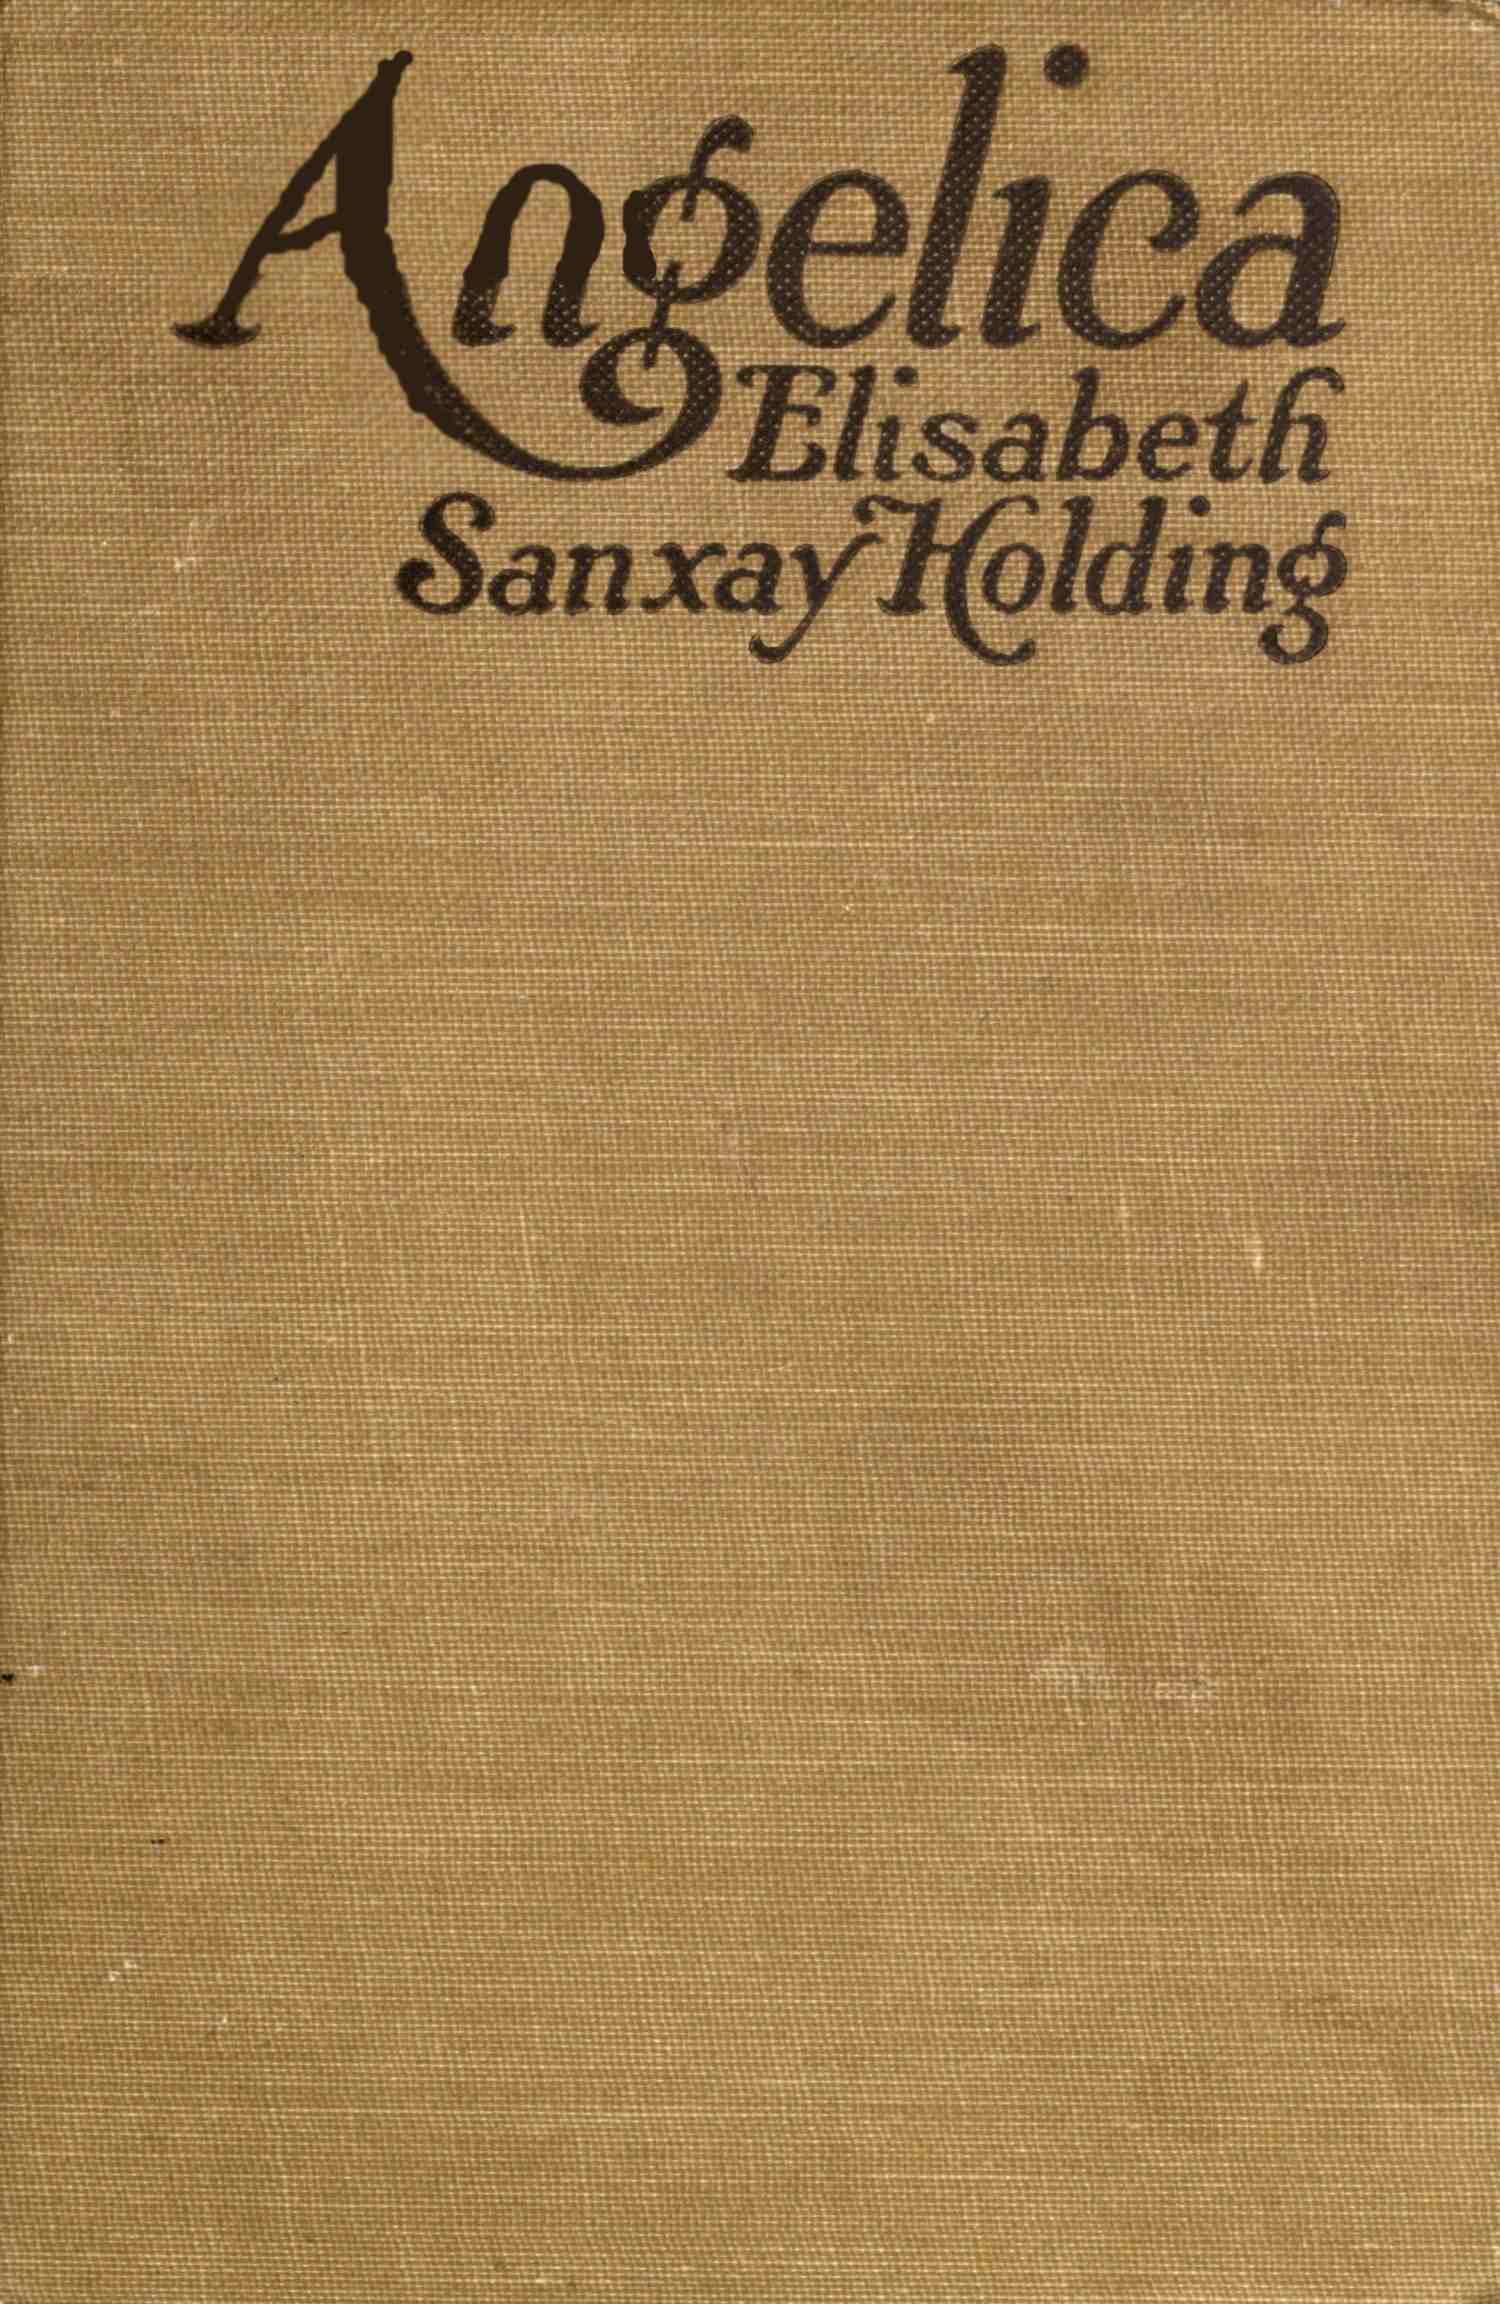 The Project Gutenberg eBook of Angelica, by Elisabeth Sanxay Holding.